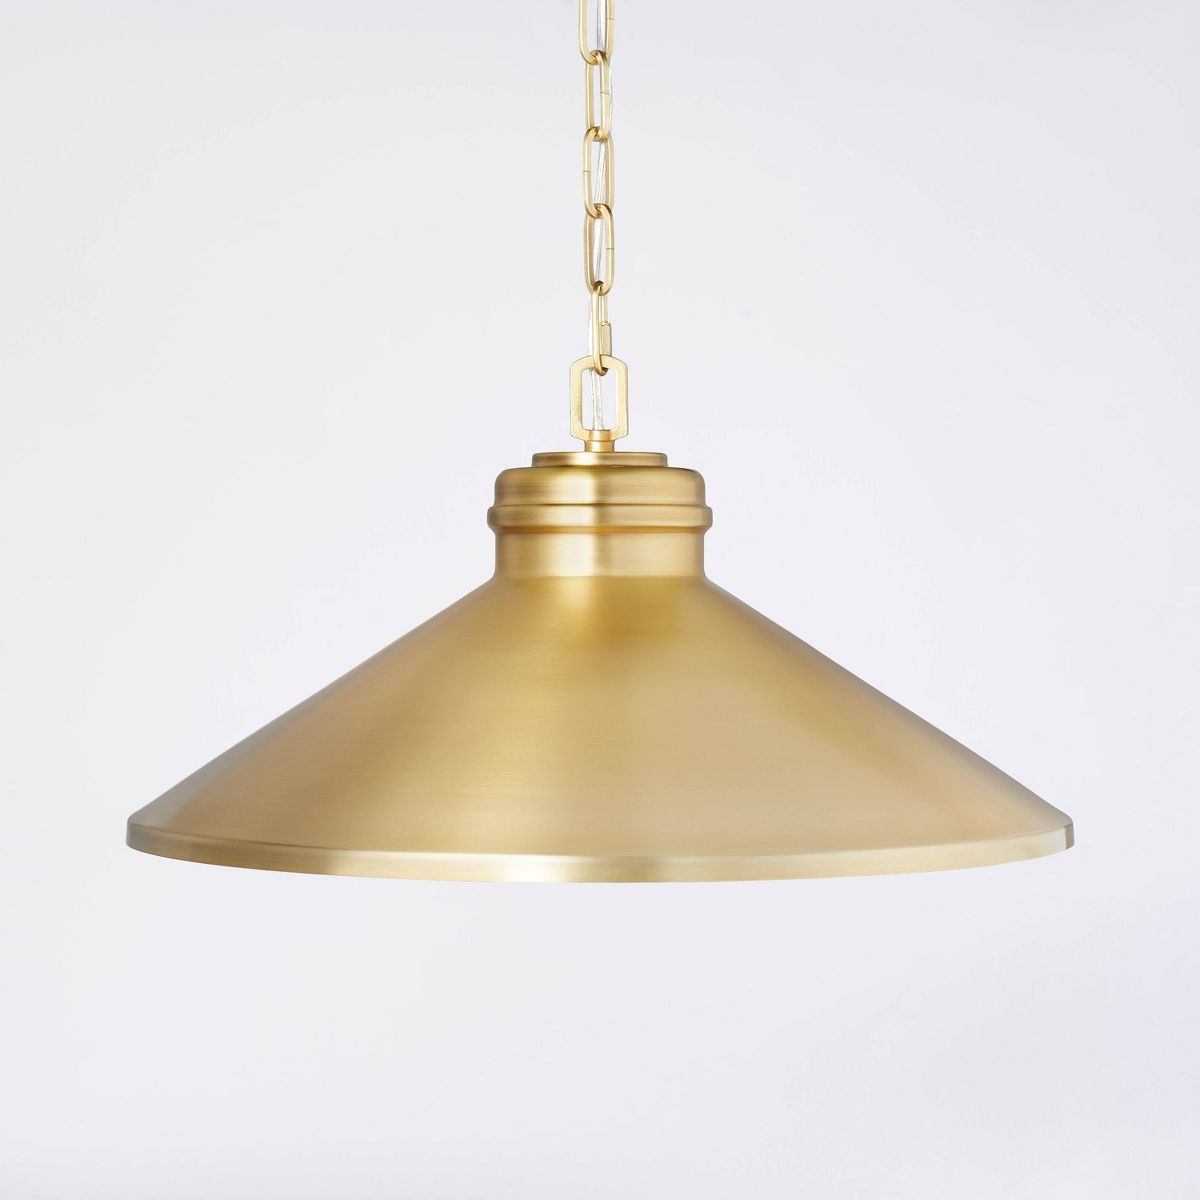 20" Large Metal Adjustable Pendant Ceiling Light Brass Finish - Hearth & Hand™ with Magnolia | Target